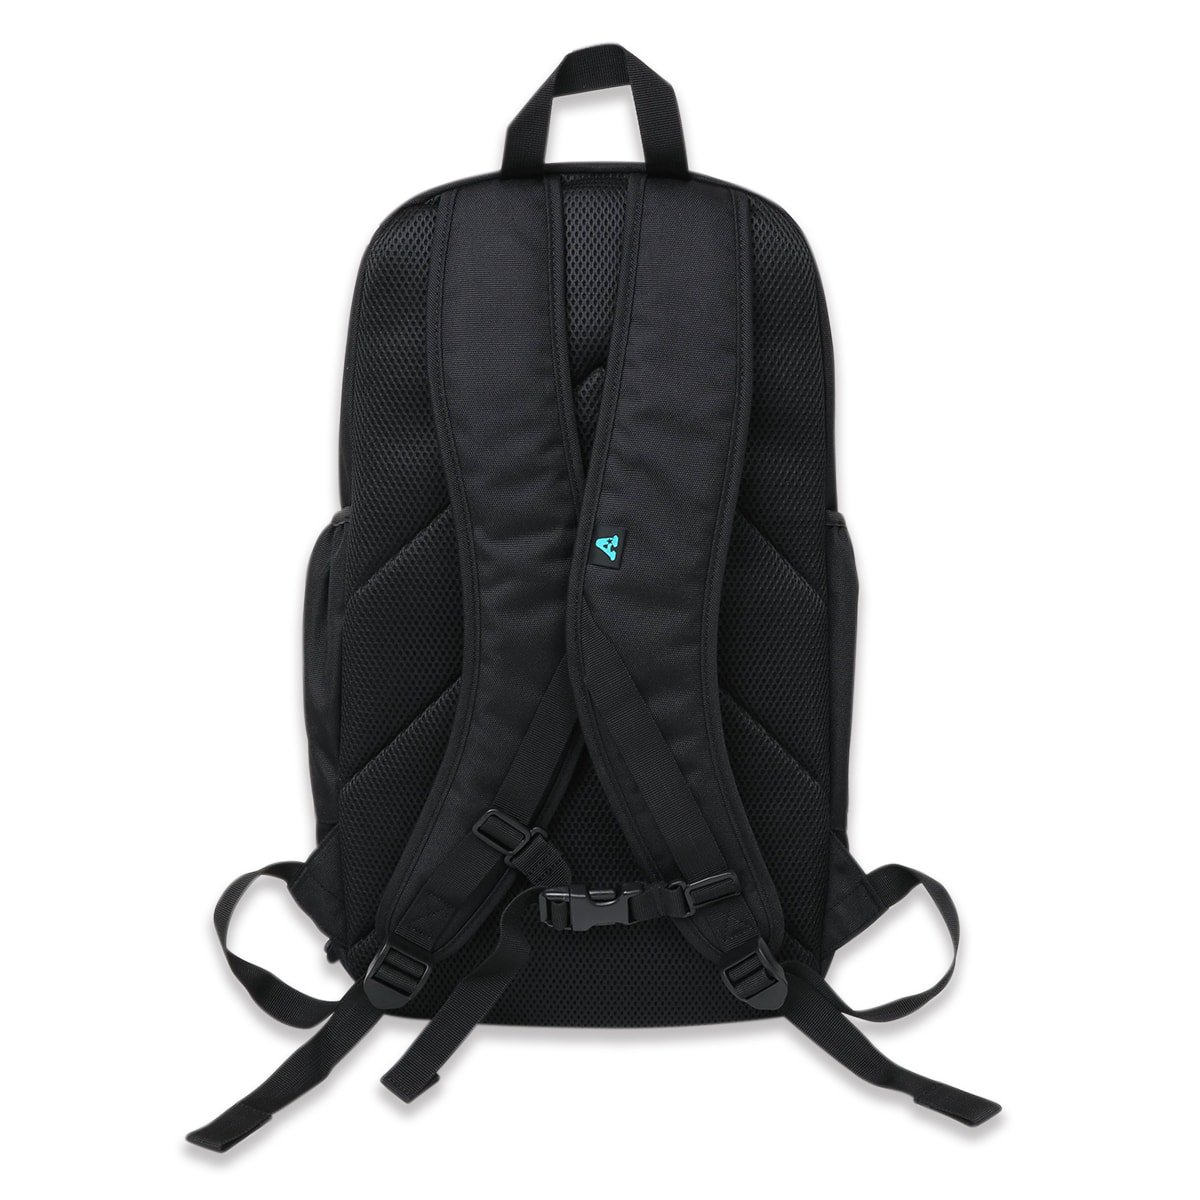 workout backpack 2.0【black/mint】 - Arch ☆ アーチ 